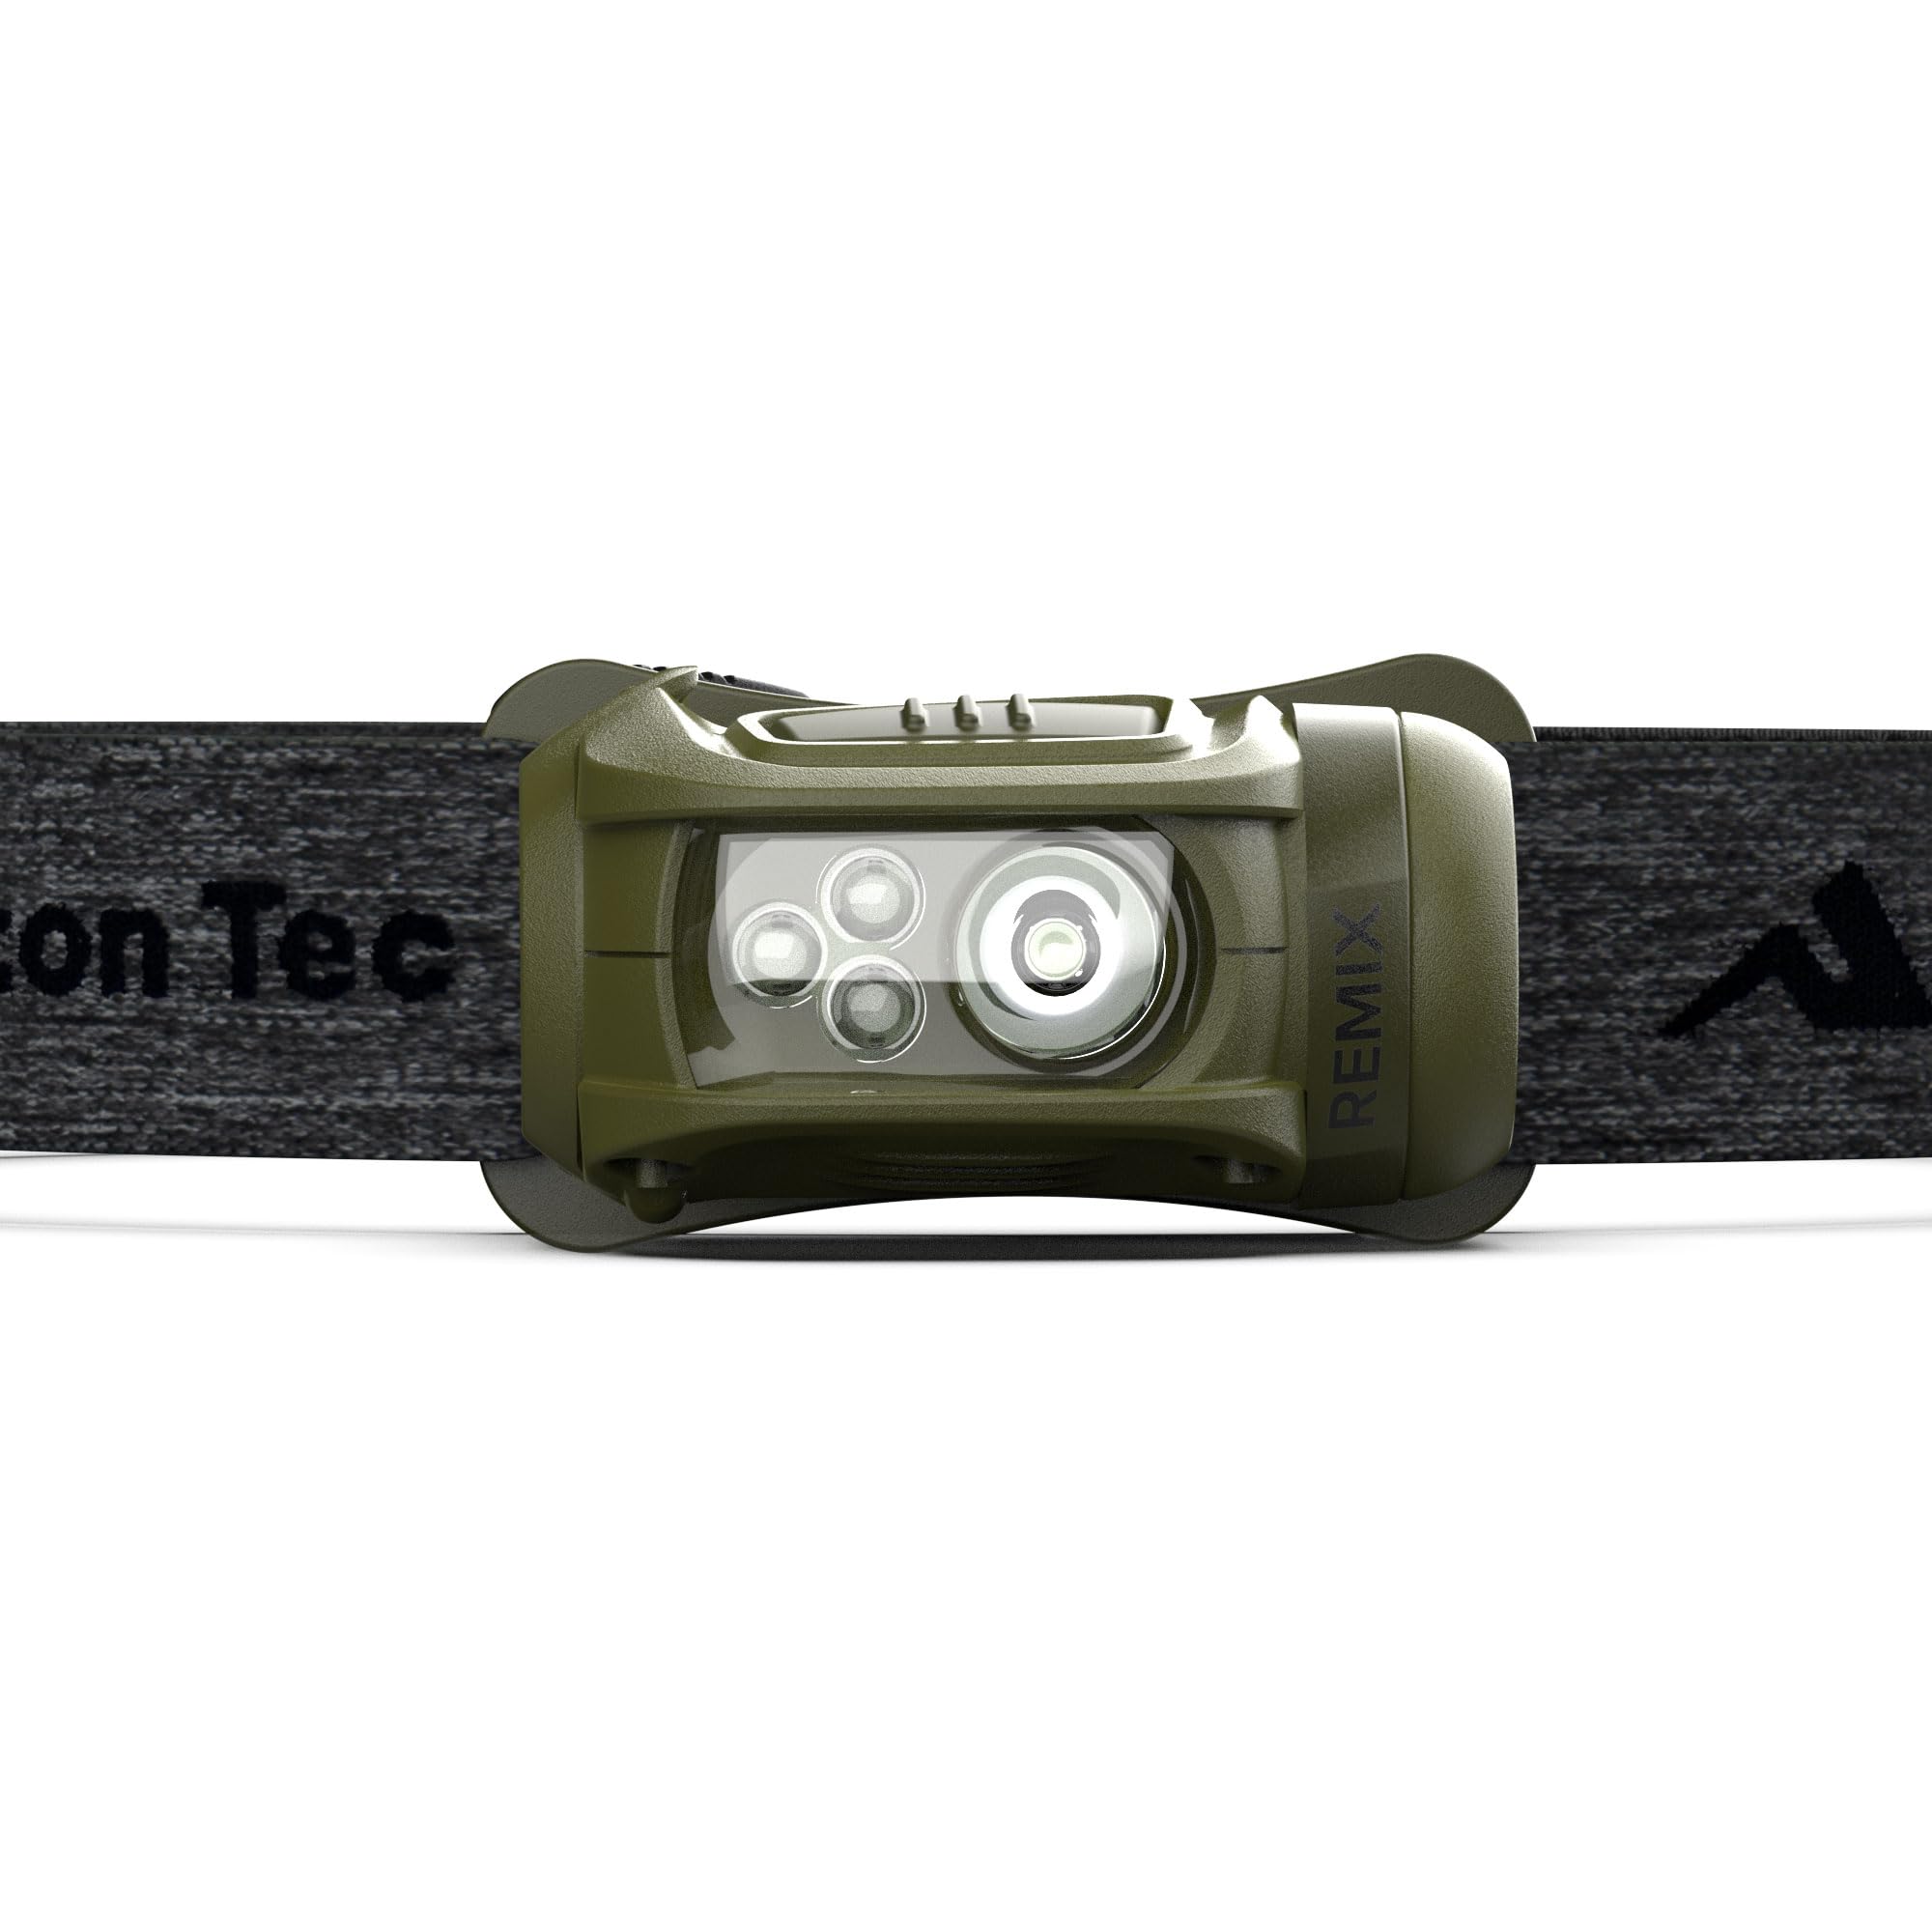 Princeton Tec Remix 450 Lumen Maxbright & Ultrabright White/Red LED Headlamp, IPX4 Water Resistance, Essential for Hiking, Camping, Hunting, Fishing, Running, & Safety Preparedness, Green